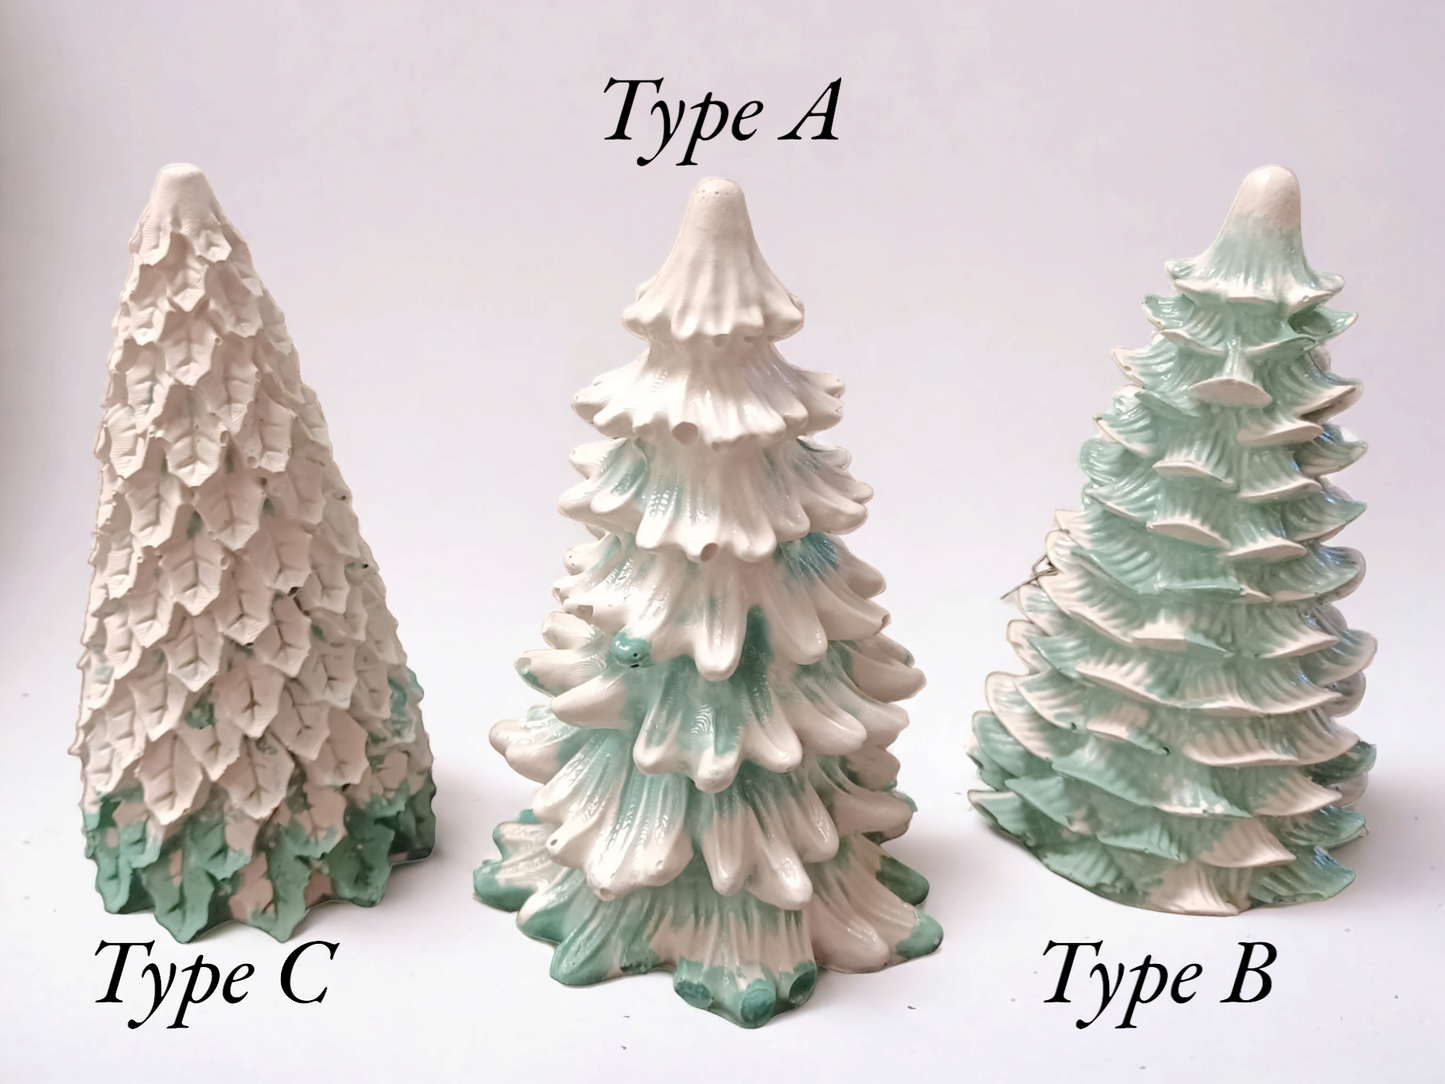 The "Holiday Pine" Handmade, Cement, Rustic Decorative Holiday Tree (Type A)